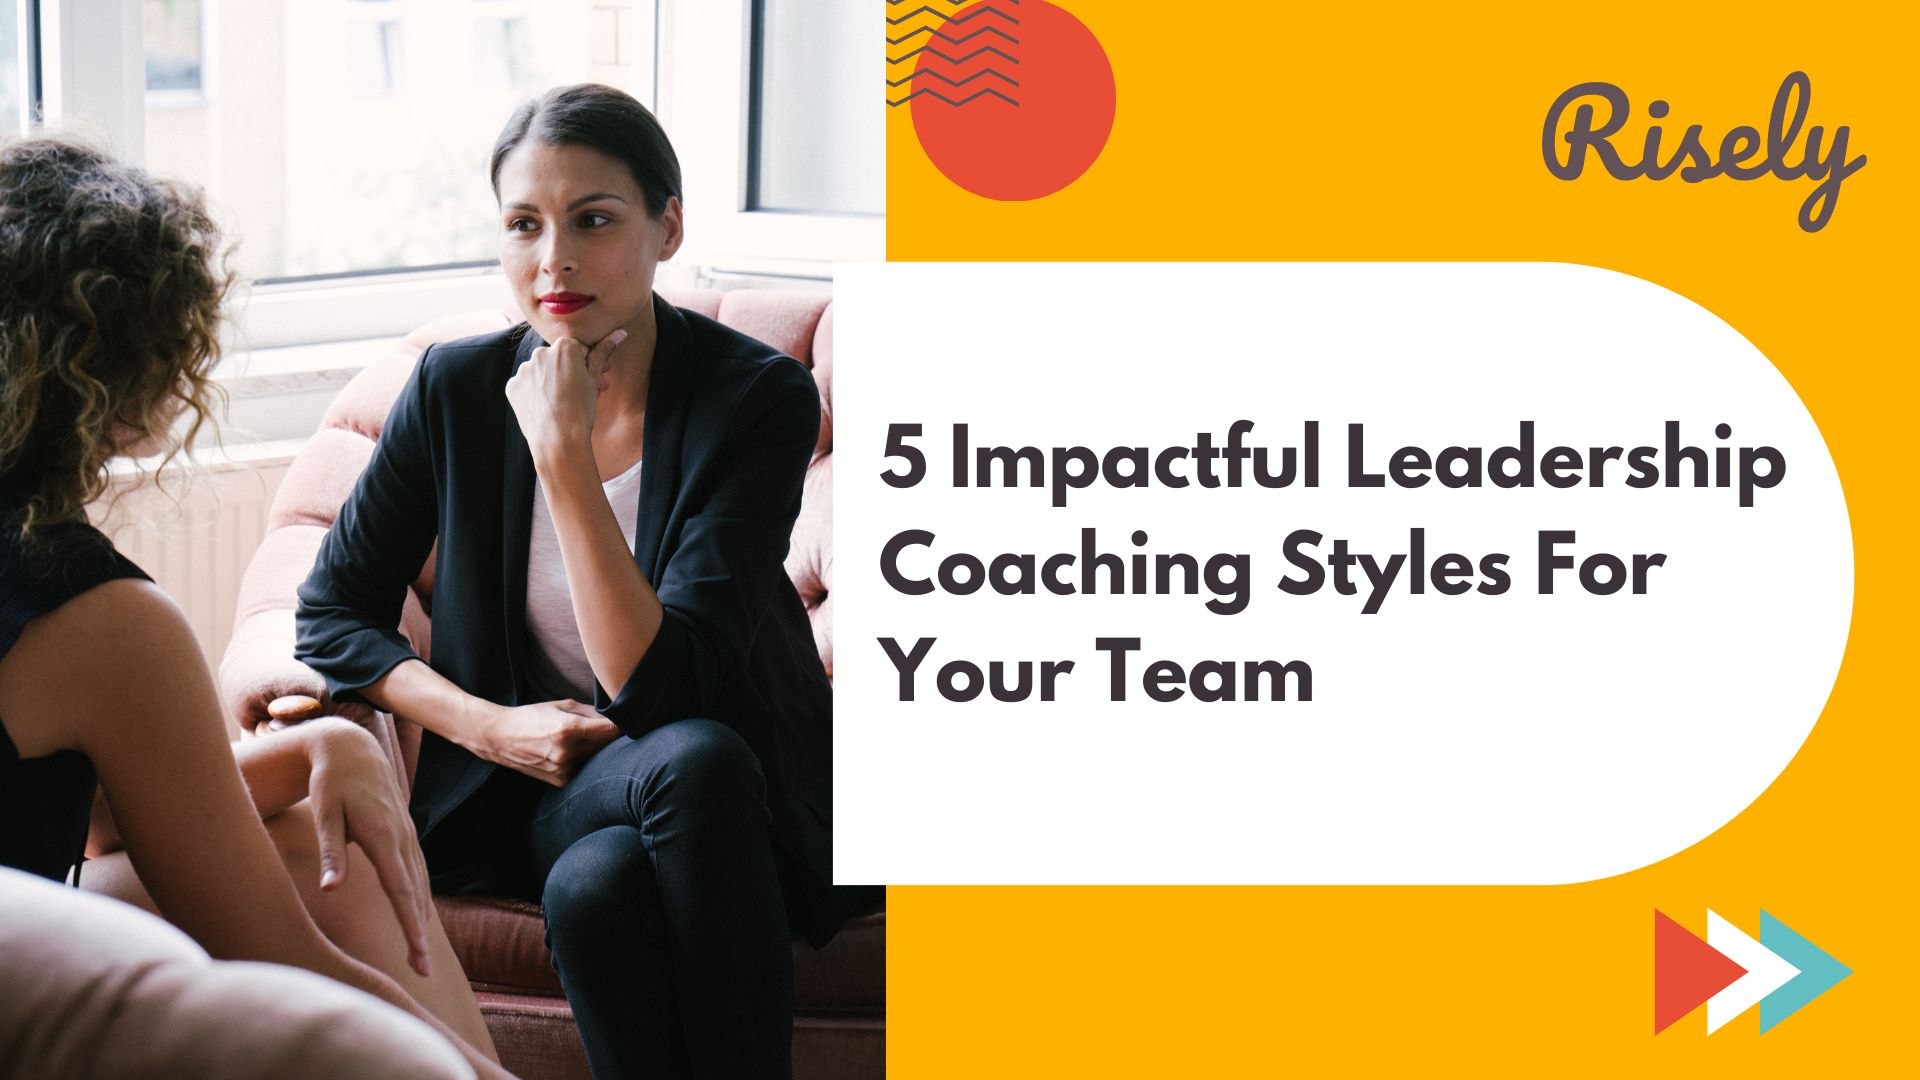 5 Impactful Leadership Coaching Styles For Your Team